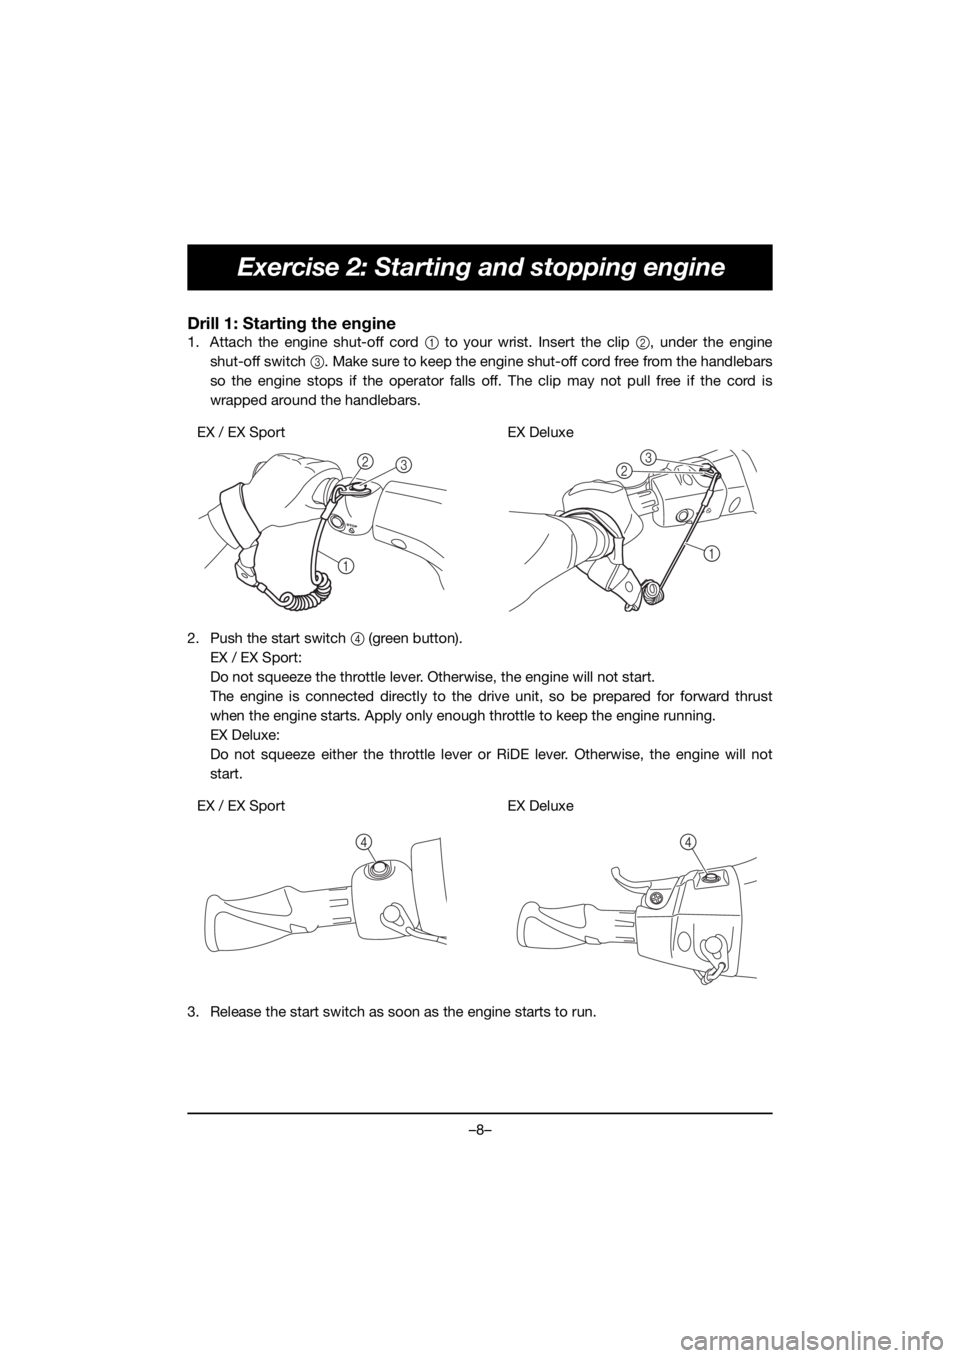 YAMAHA EX DELUXE 2020  Notices Demploi (in French) –8–
Exercise 2: Starting and stopping engine
Drill 1: Starting the engine
1. Attach the engine shut-off cord 1 to your wrist. Insert the clip 2, under the engine
shut-off switch 3. Make sure to ke